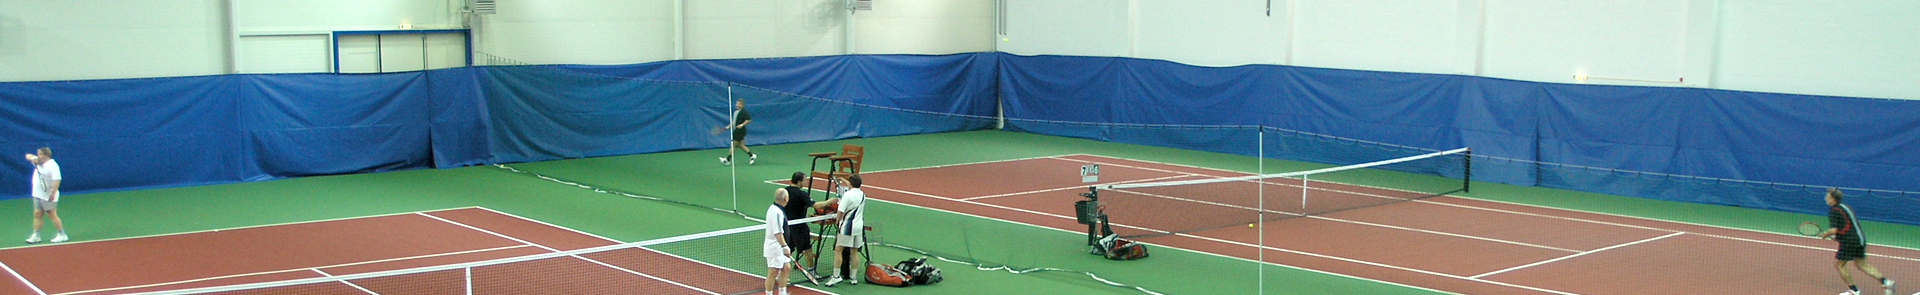 Indoor Tennis Courts Backdrop Curtains